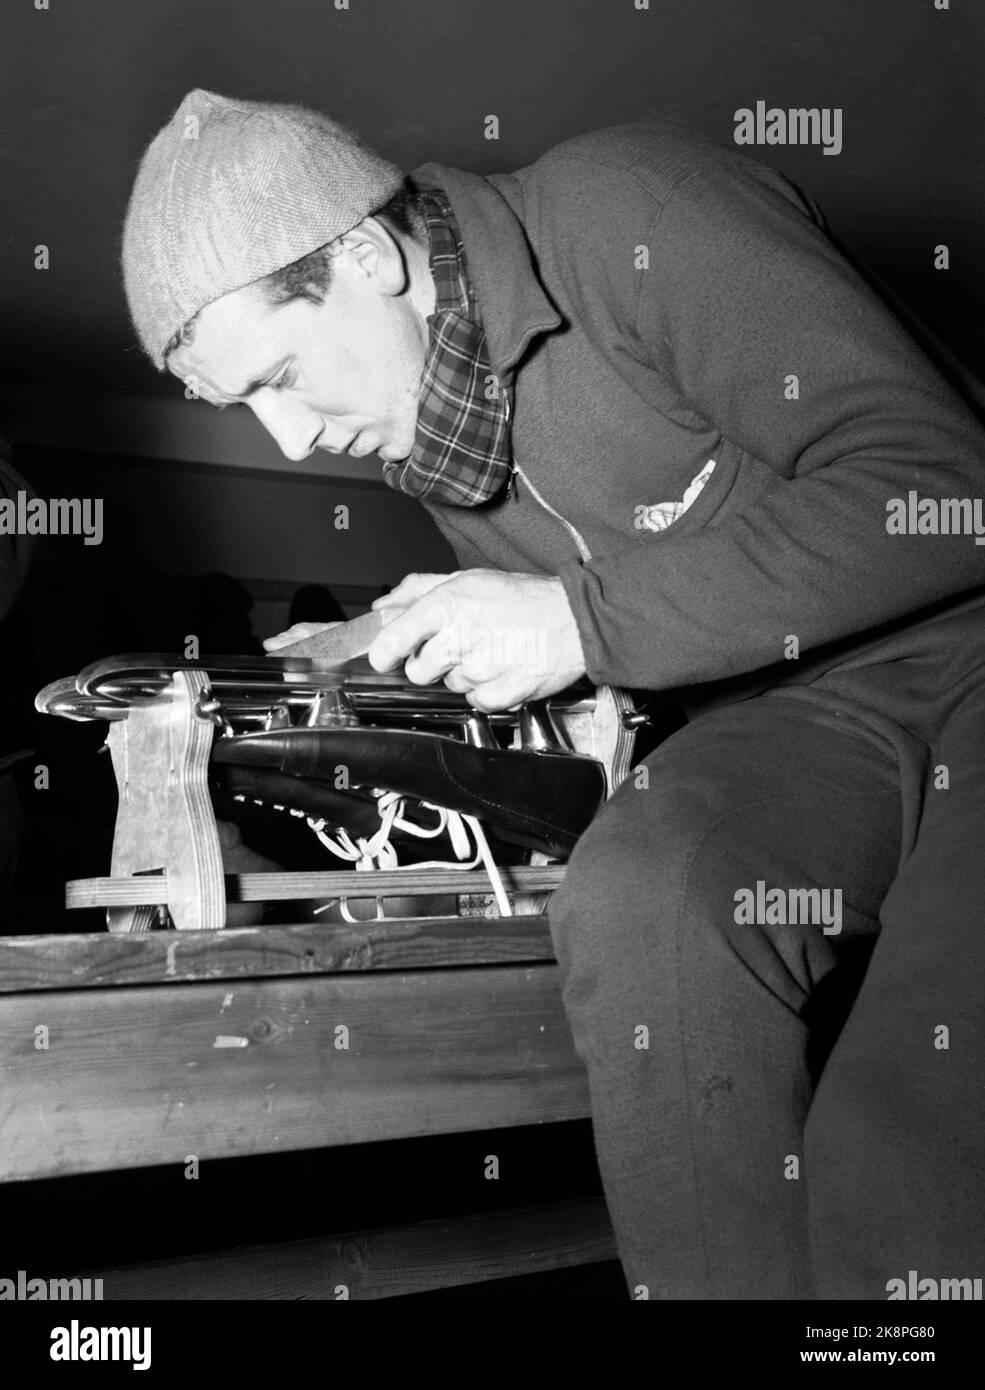 Oslo Jan. 1948: Pre-pictures for Olympic Games 1948. Here Reidar Liaklev, one of Norway's best hopes for the ice skating competitions. Liaklev grinds the skates. Photo: Sverre A. Børretzen / Current / NTB Stock Photo